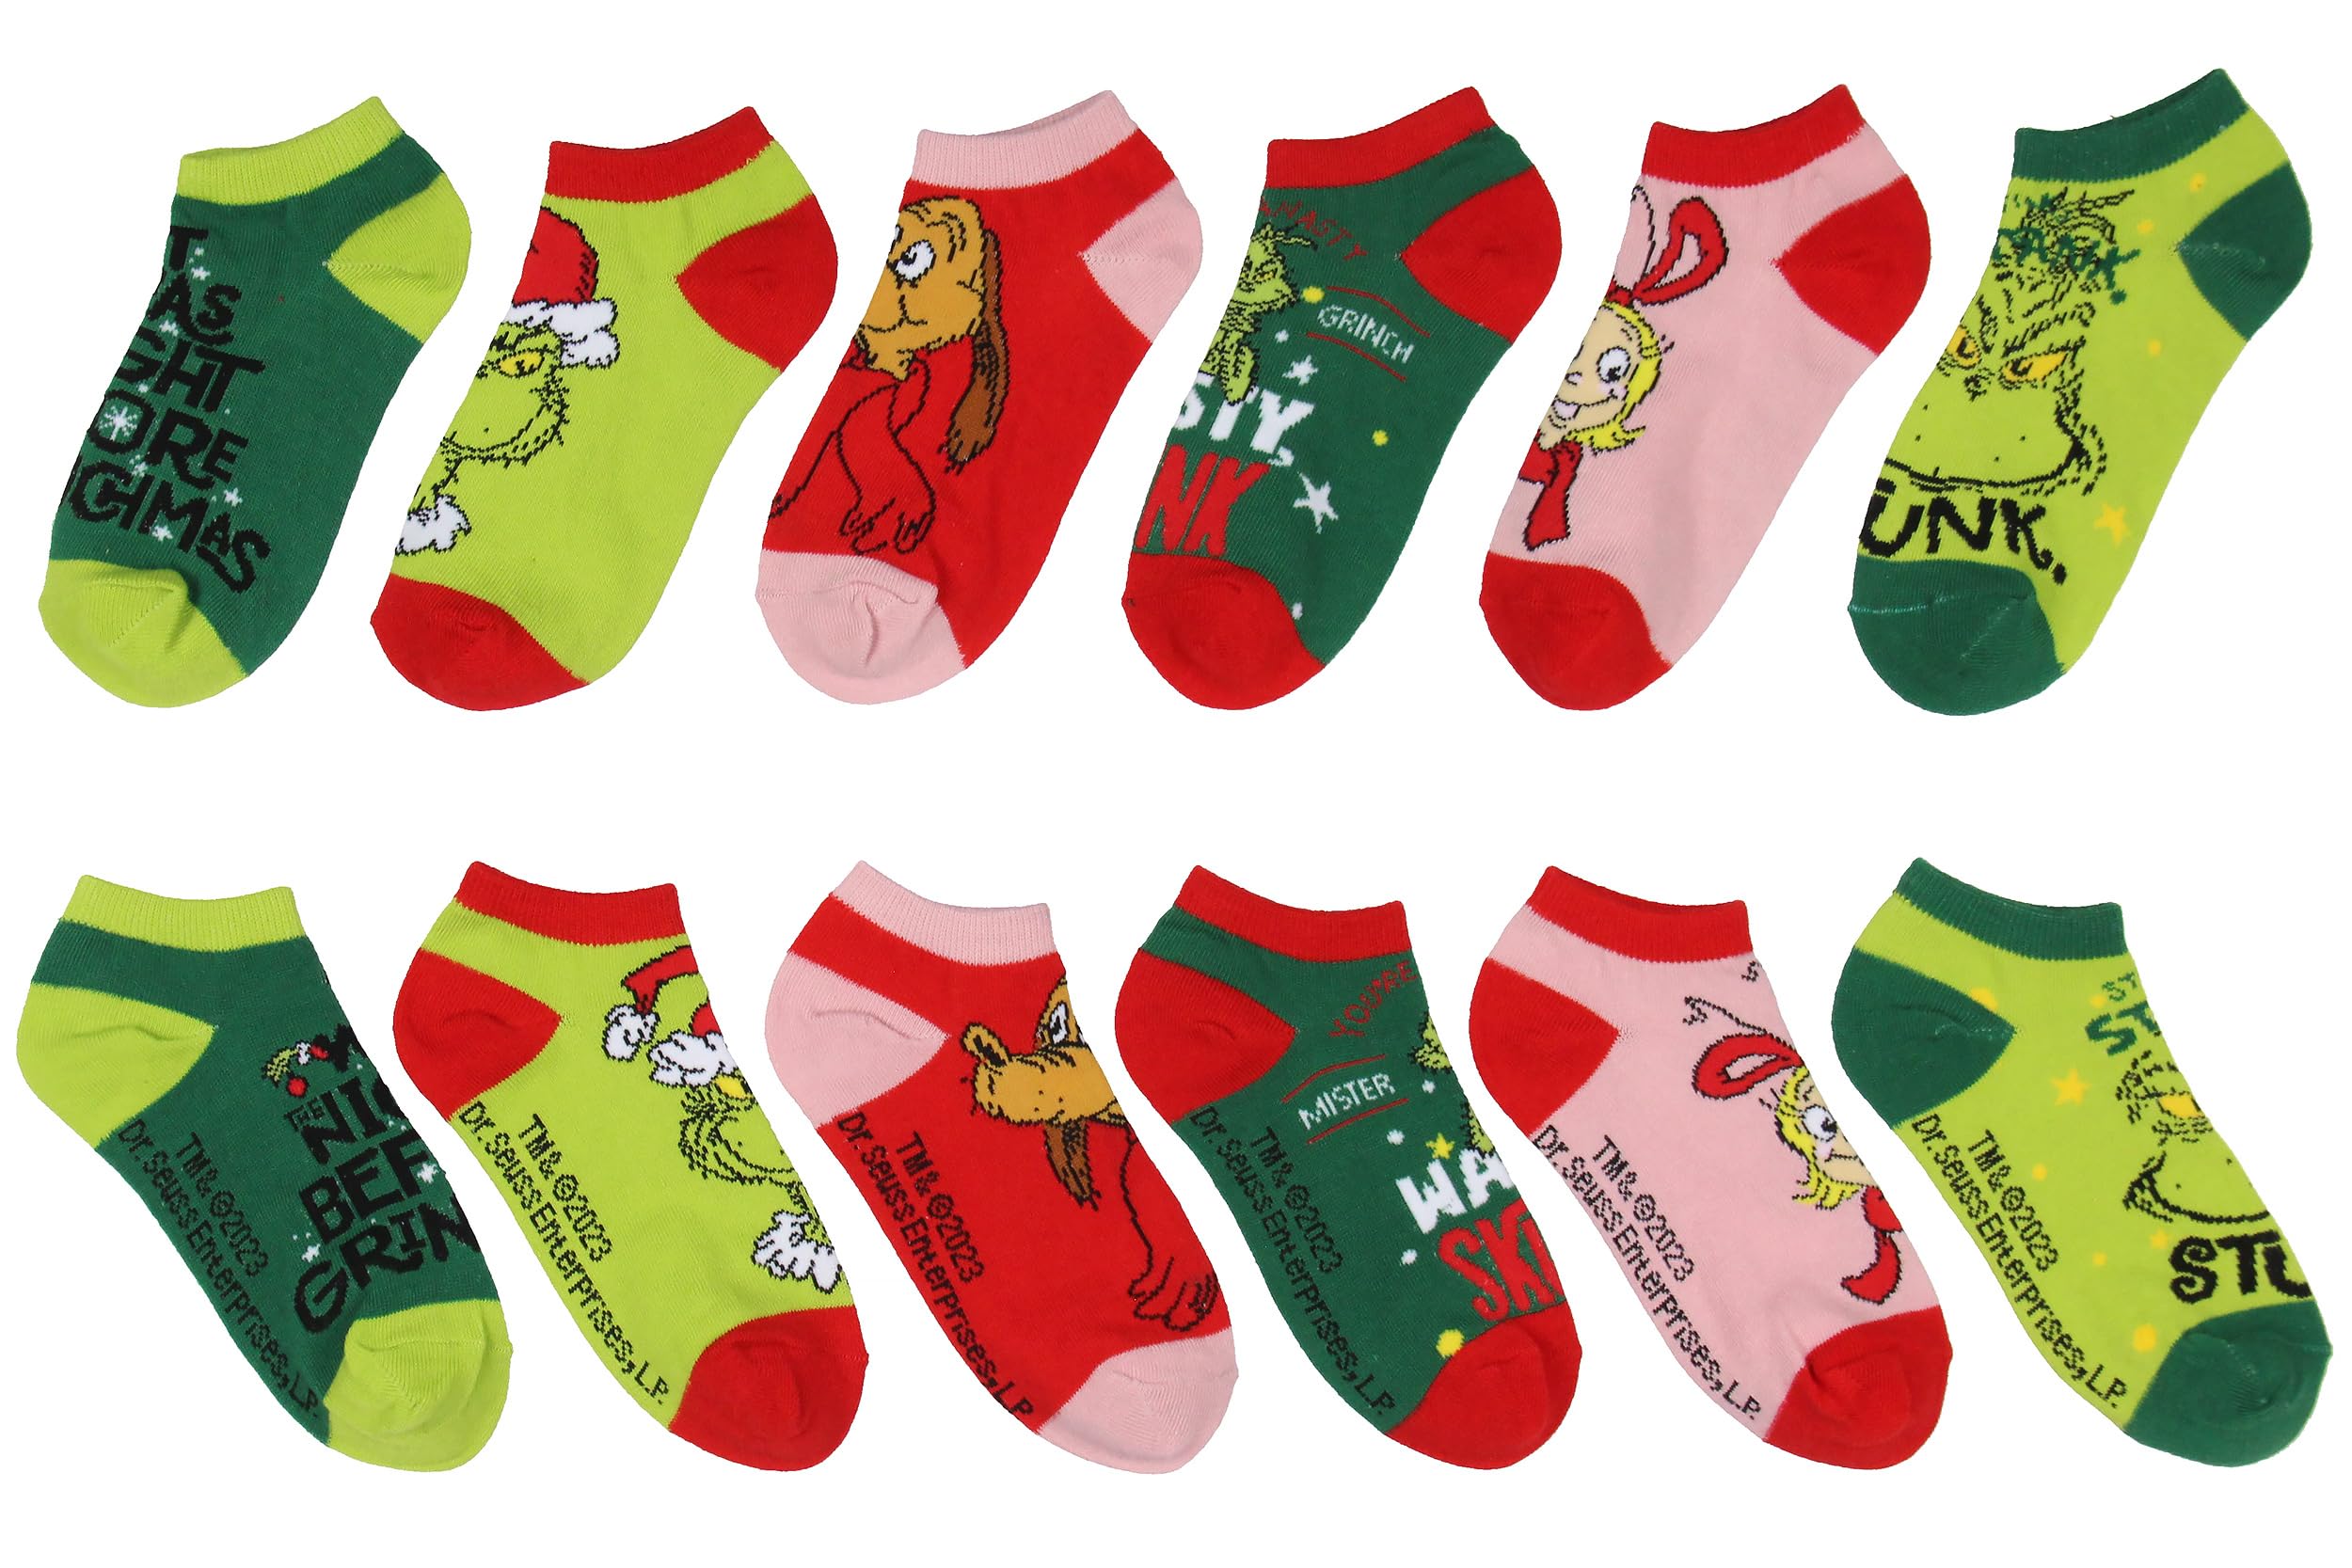 Dr. Seuss The Grinch Boys' Socks Cindy Lou Who Max Grinch Kids Character Low Cut Ankle No Show Socks 6 Pairs